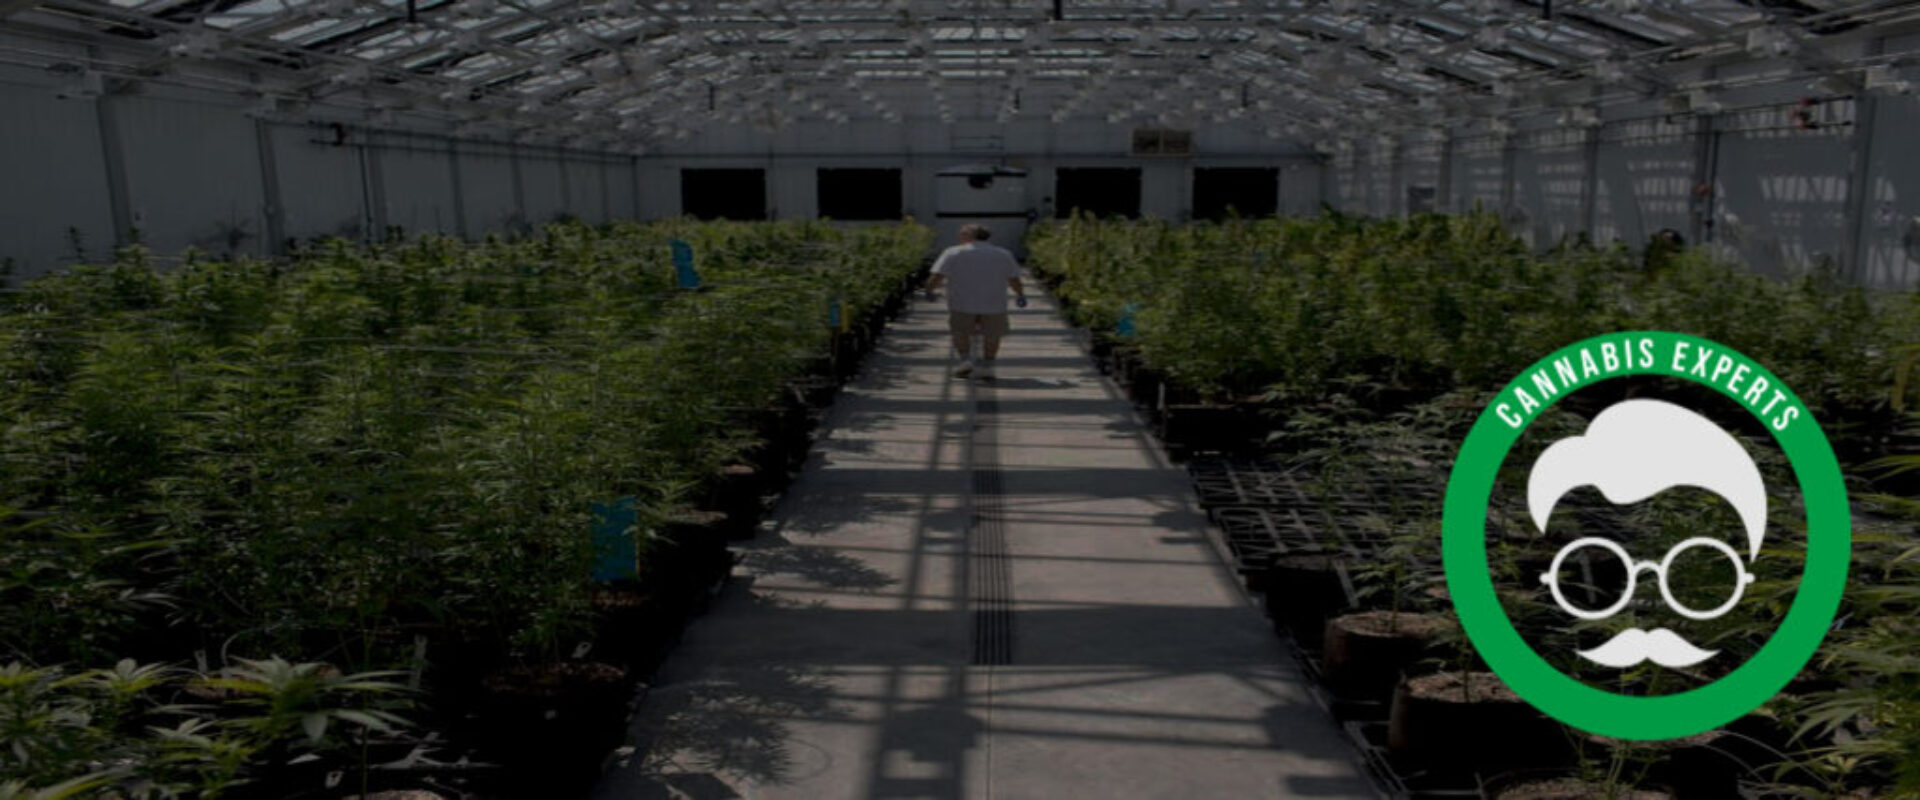 PROVIDING BEST IN CLASS SOLUTIONS FOR THE CANNABIS INDUSTRY AS A CANNABIS SYSTEMS INTEGRATOR